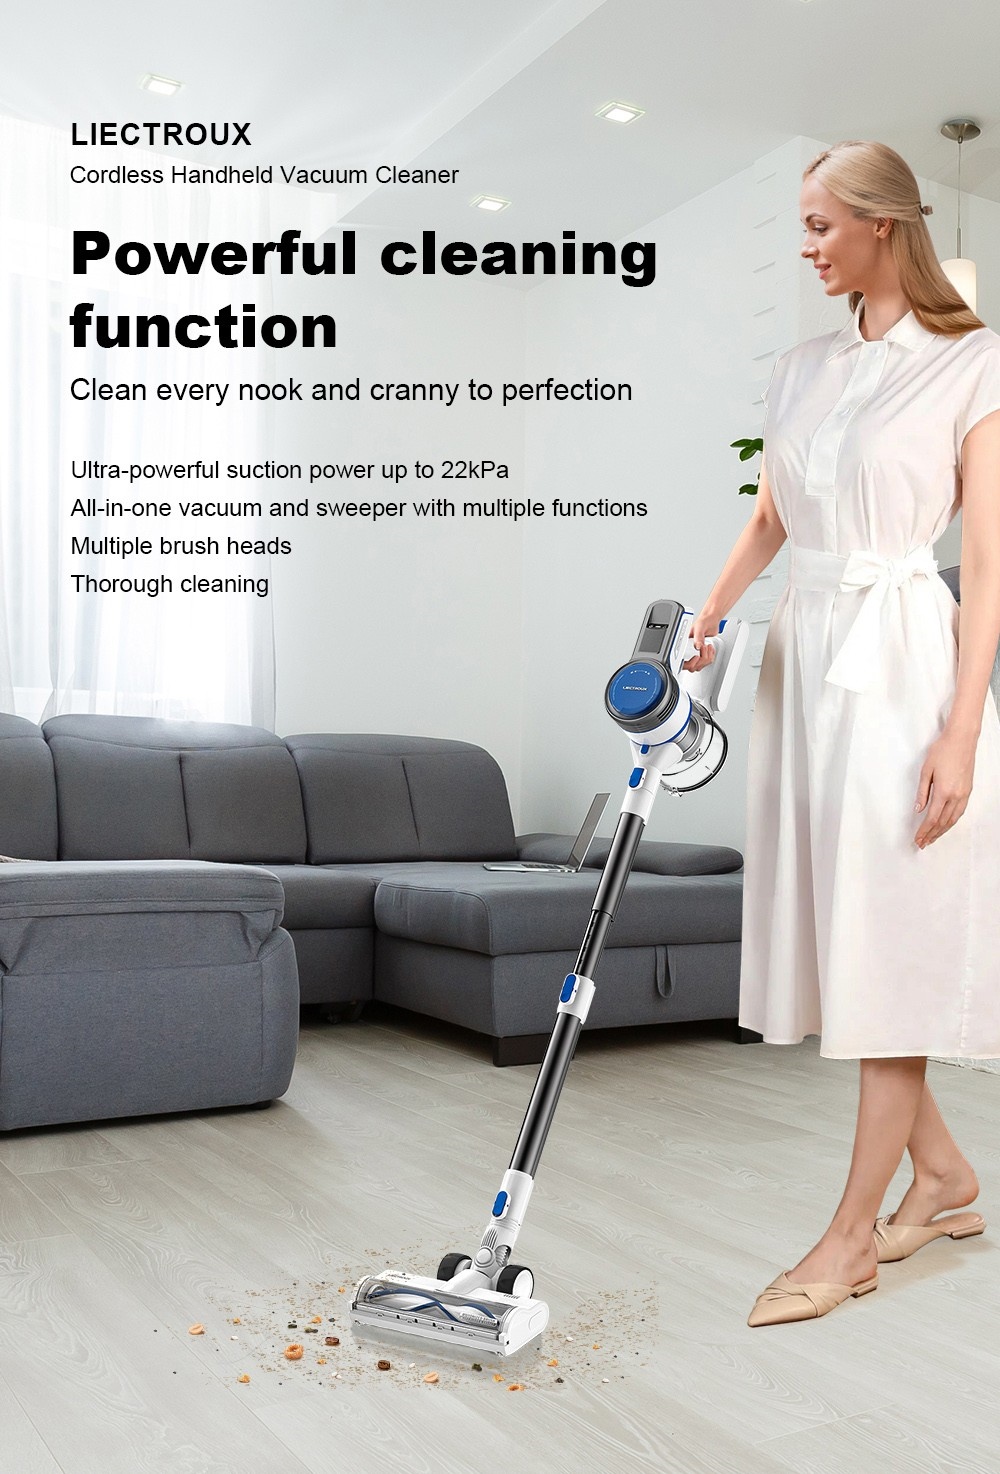 Liectroux i7 Cordless Vacuum Cleaner, 22KPa Suction, 800ml Dustbin, Removable 2200mAh Battery, Up to 30min Runtime, Low Noise